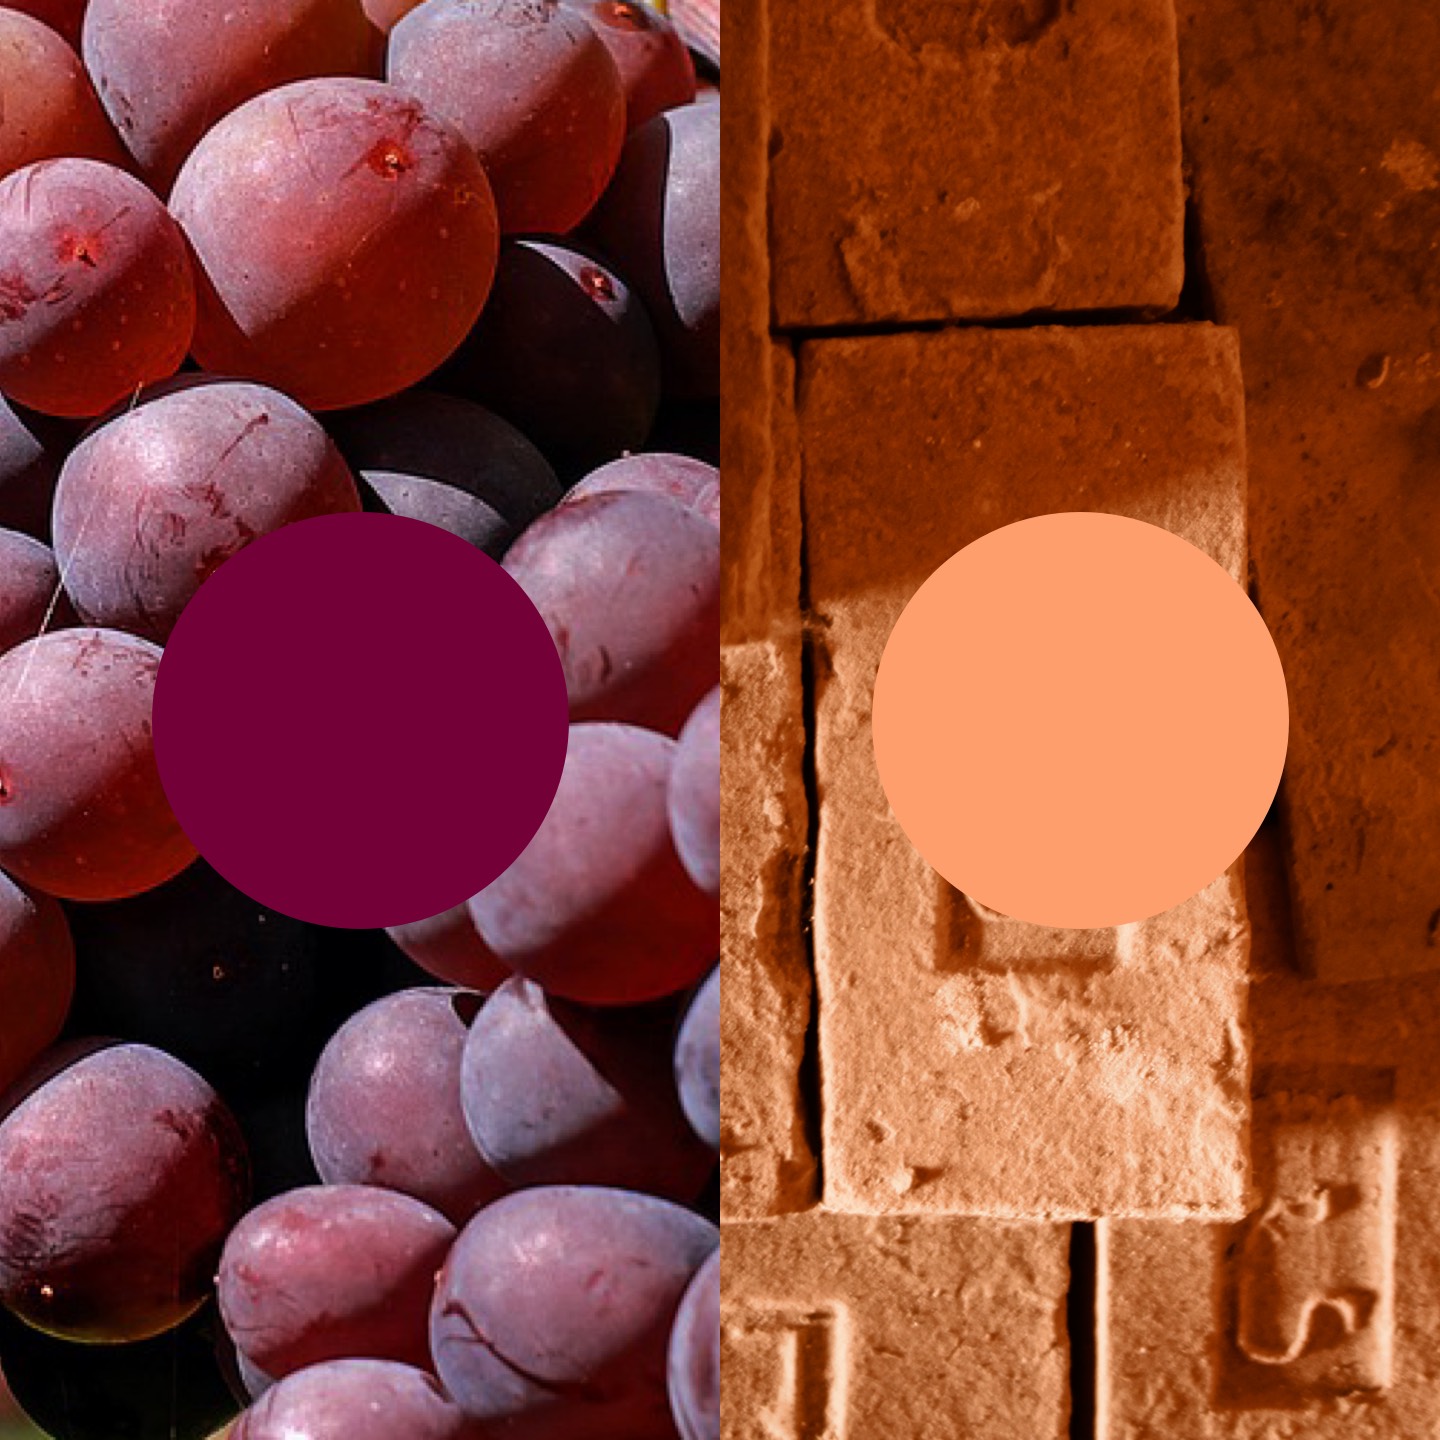 The color concept is influenced by red grapes and old bricks